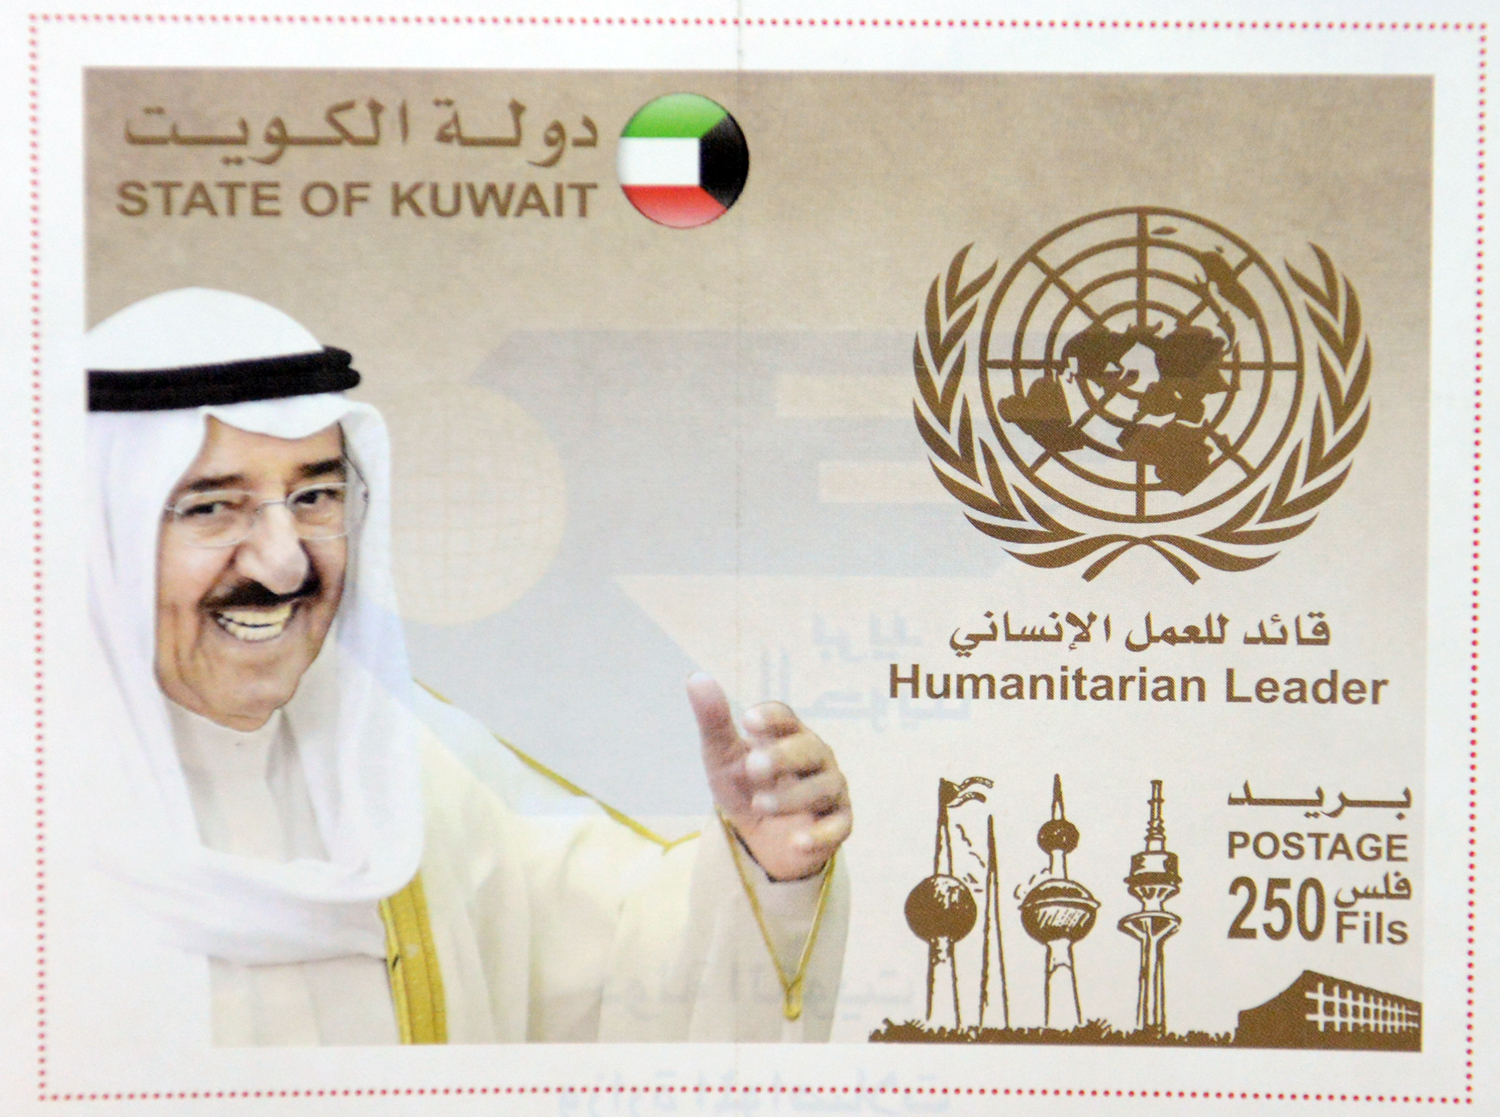 Stamp with a picture (His Highness Sheikh Sabah Al-Ahmad Al-Jaber Al-Sabah: A Humanitarian Leader) to commemorate the UN honoring of Kuwait's leader